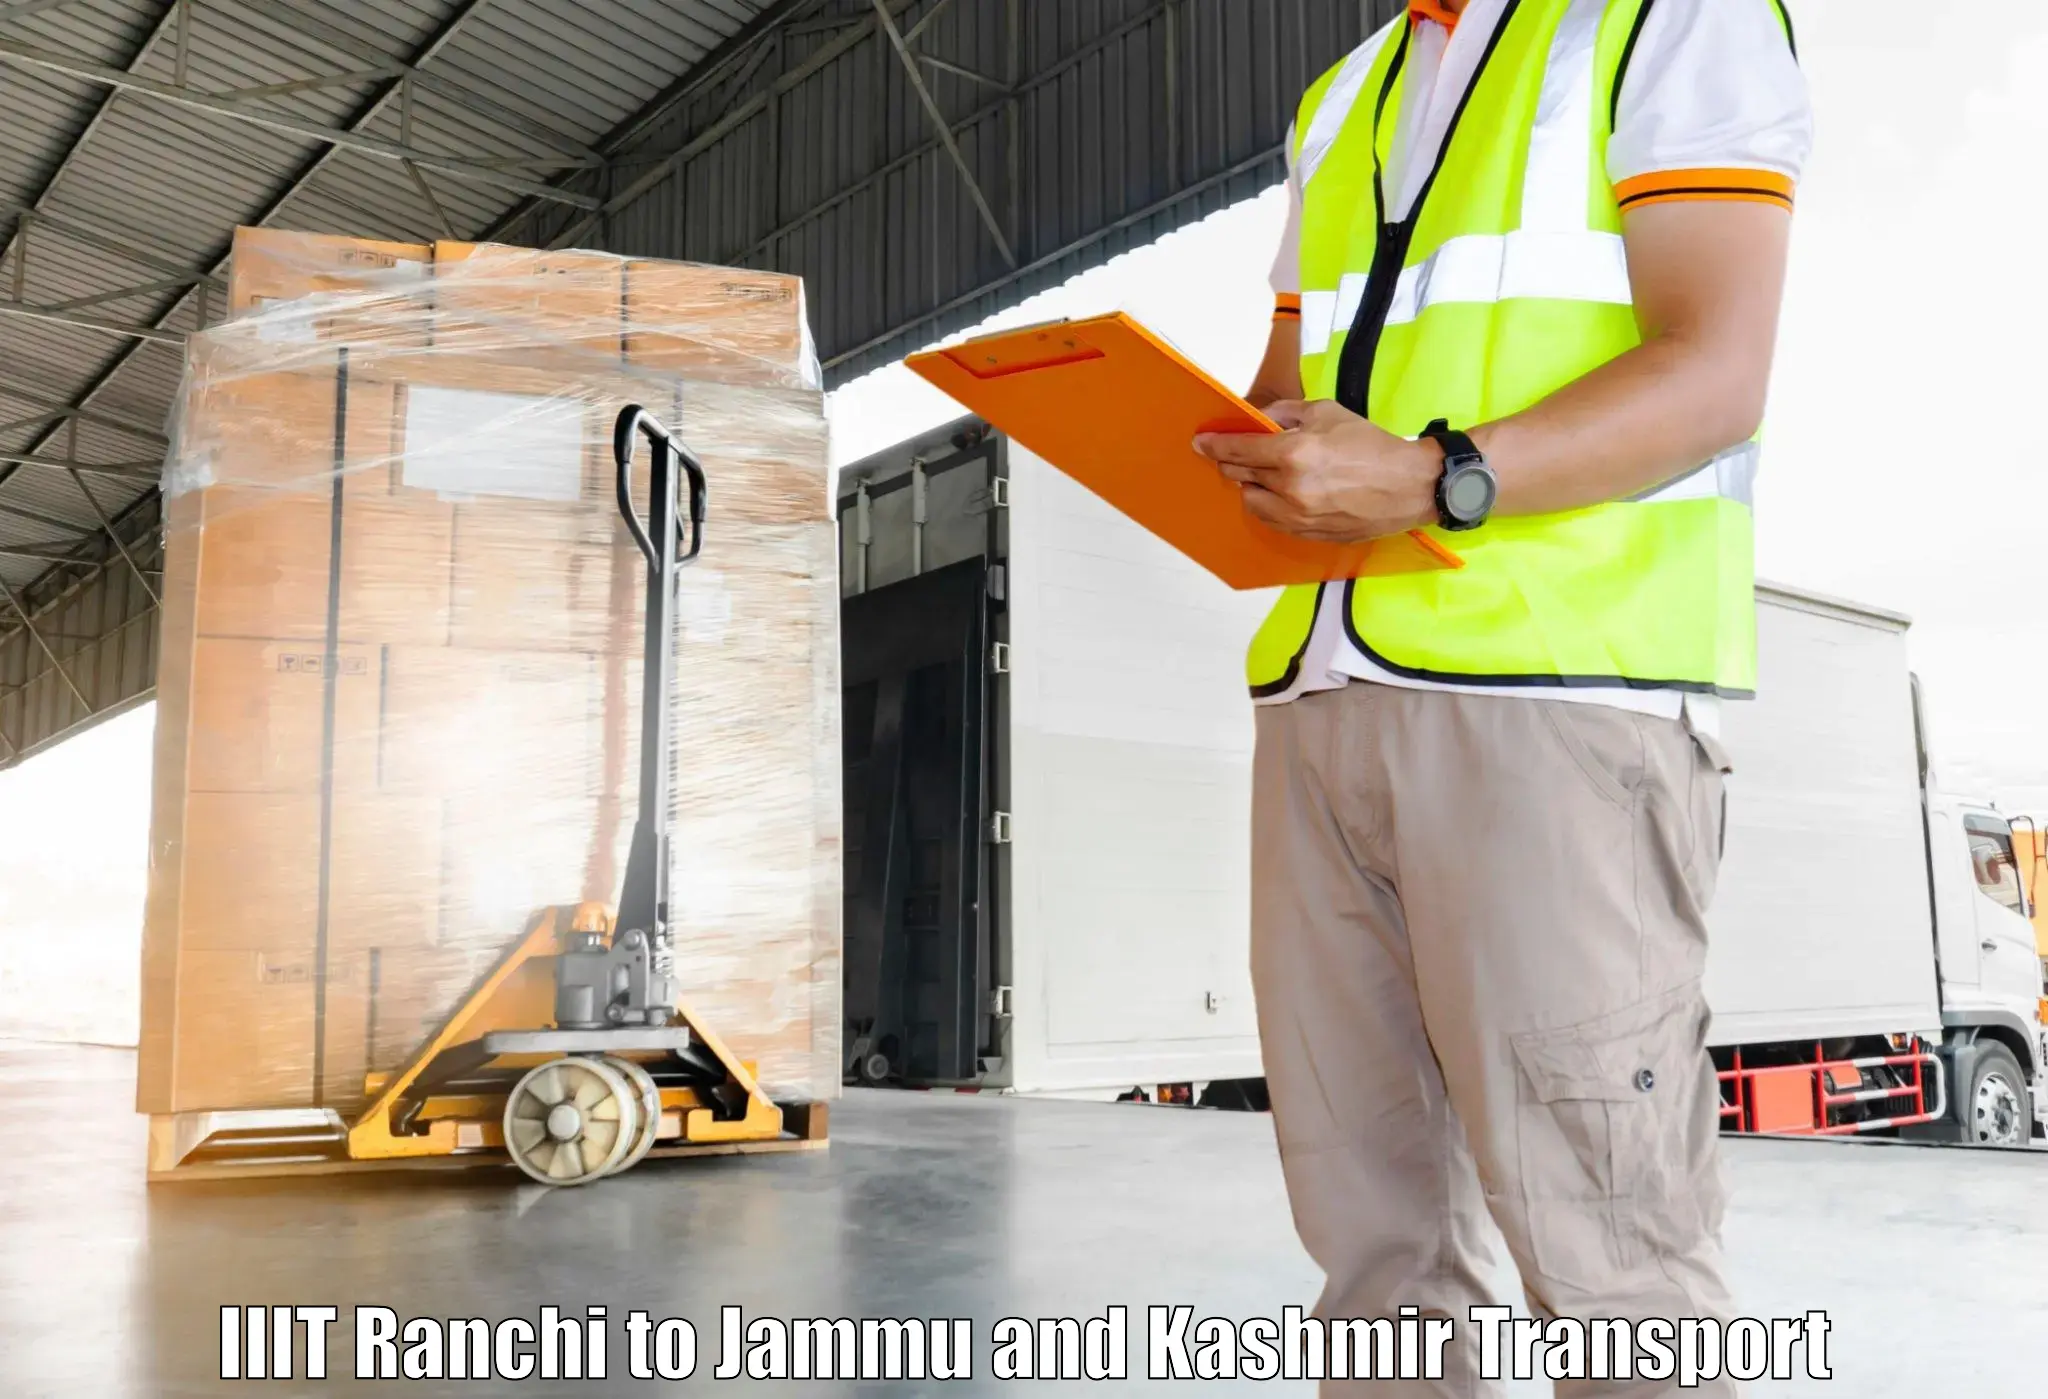 Delivery service IIIT Ranchi to Jammu and Kashmir